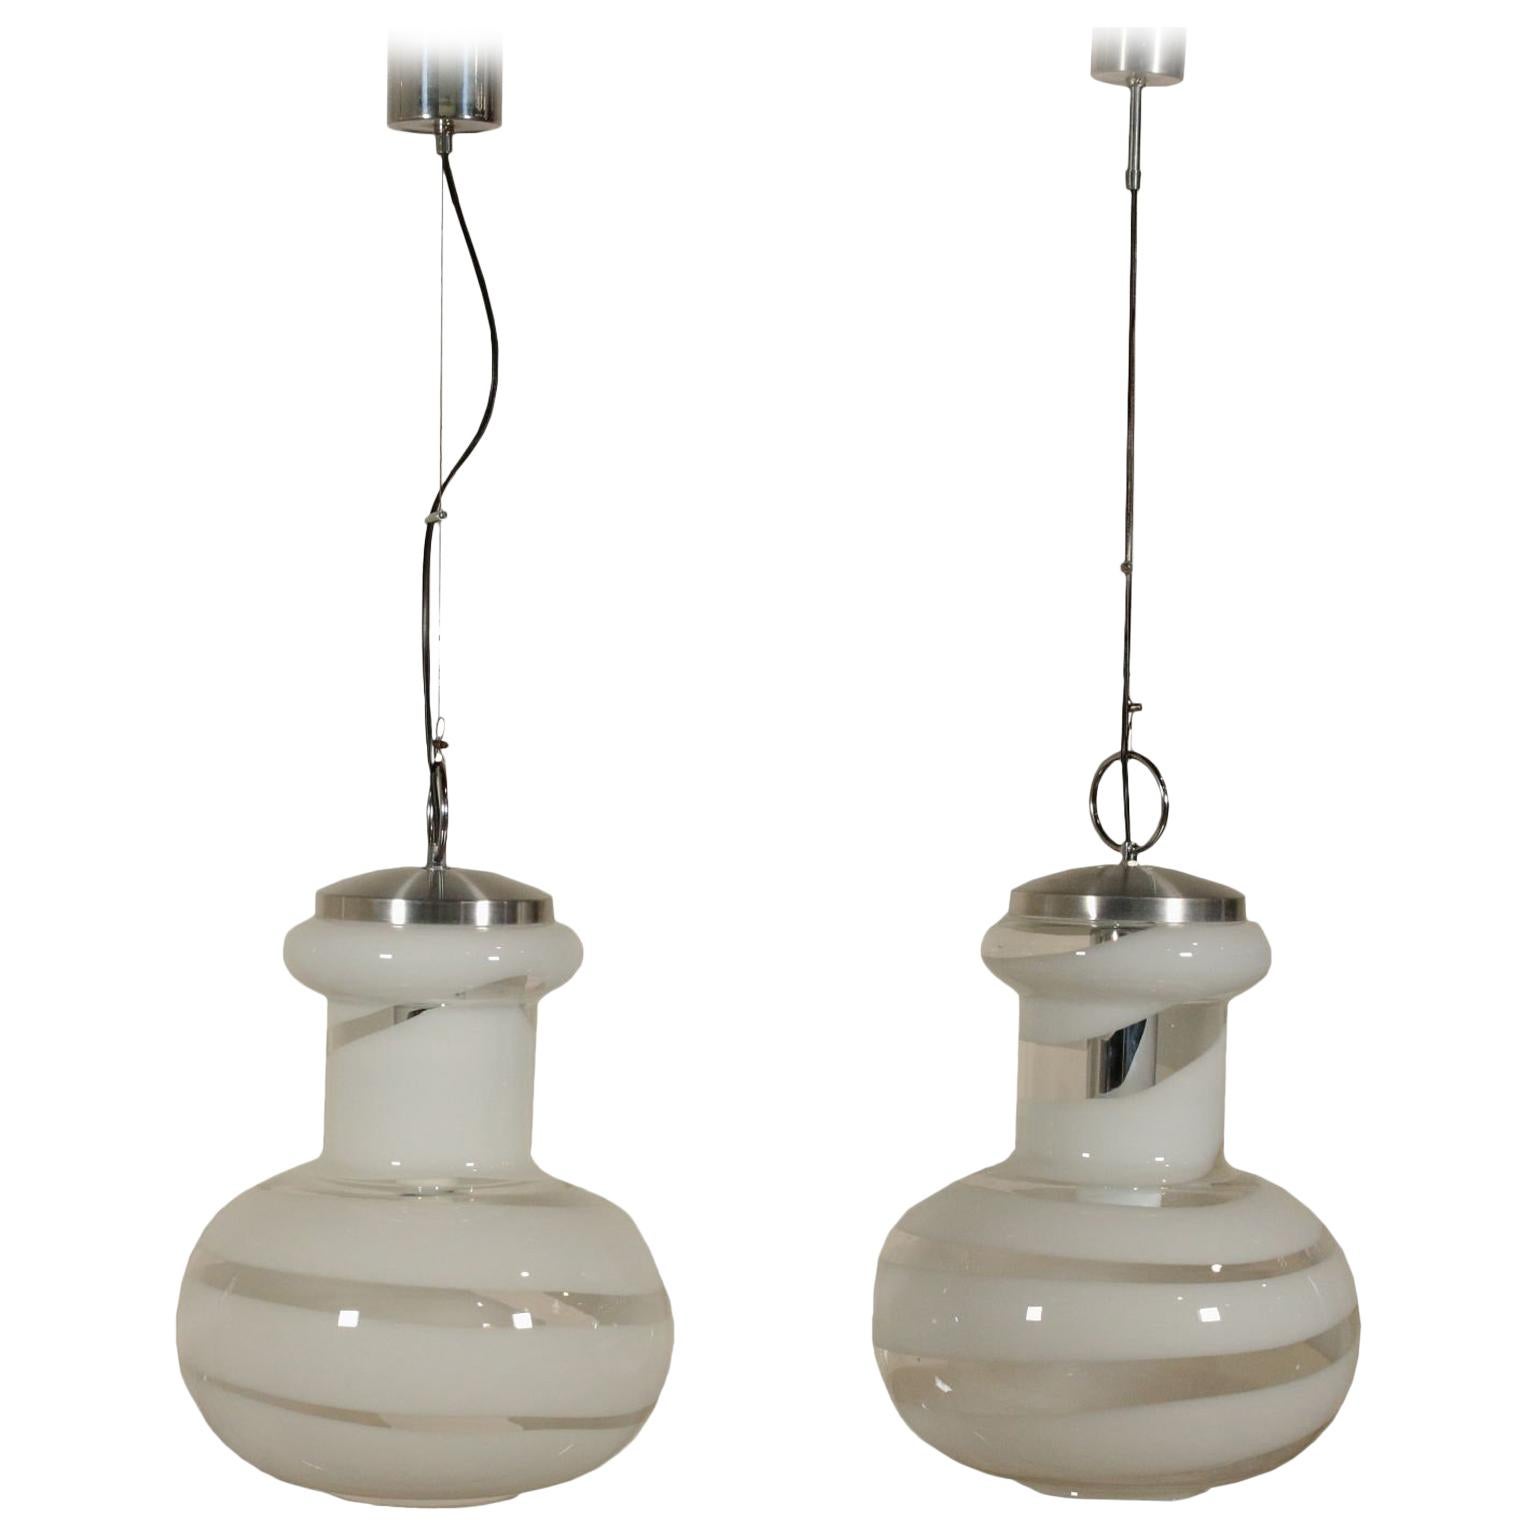 Pair of Ceiling Lamps Metal Blown Glass Vintage, Italy, 1960s-1970s